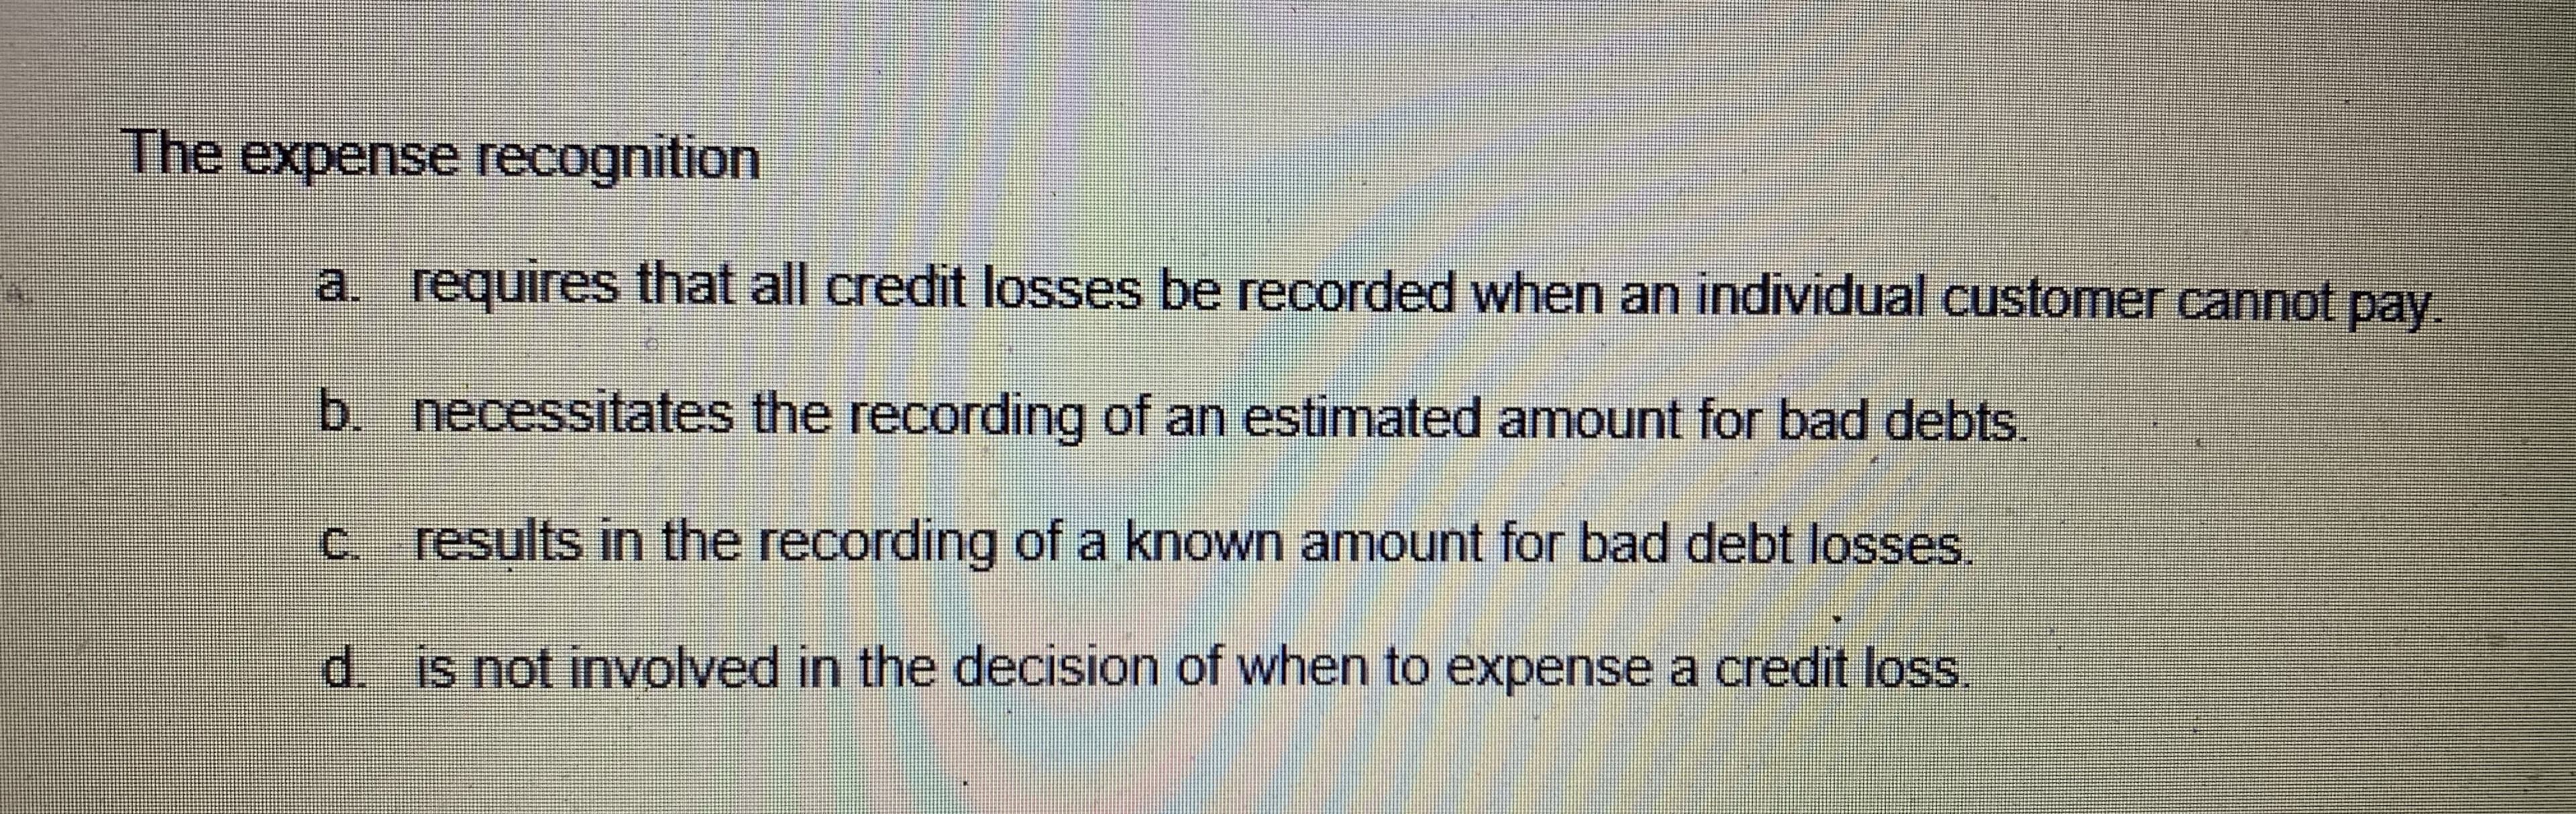 The expense recognition
a. requires that all credit losses be recorded when an individual customer cannot pay
b. necessitates the recording of an estimated amount for bad debts.
c. results in the recording of a known amount for bad debt losses.
d. is not involved in the decision of when to expense a credit loss
